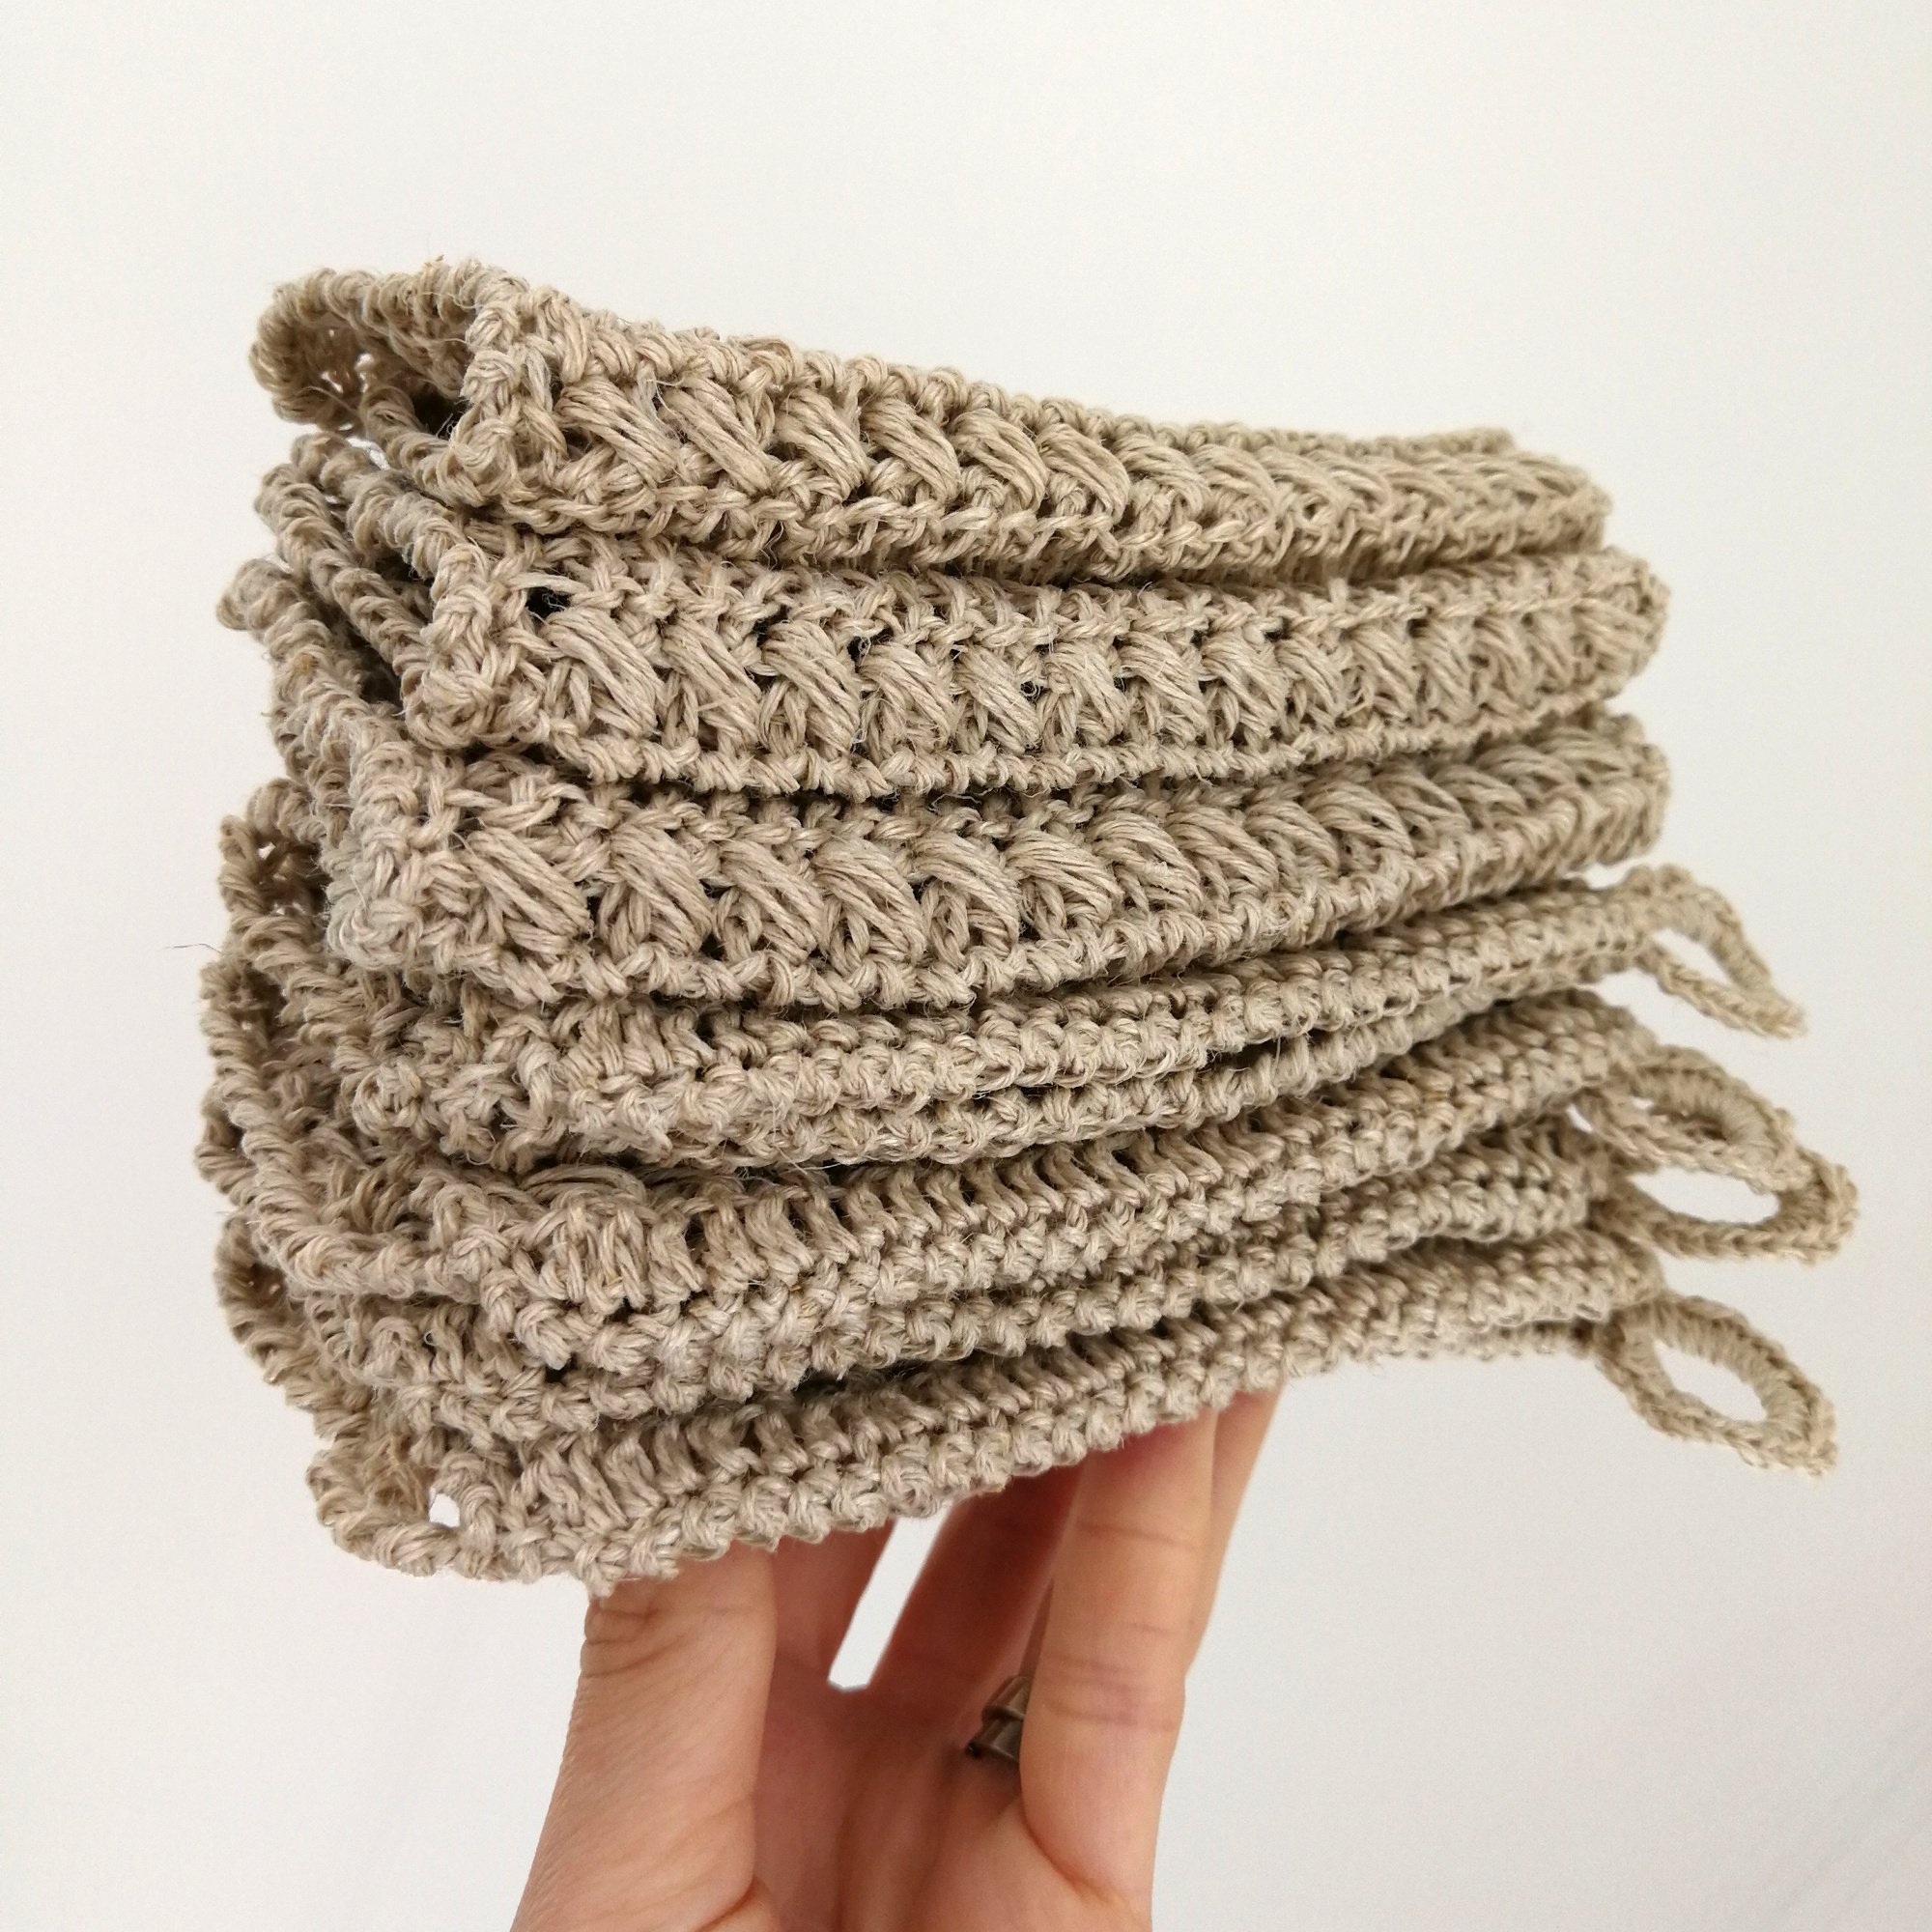 Tina's hand is holding up a stack of dishcloths on her fingertips. They have a textured surface and a natural colour. They are made from 100% hemp yarn.